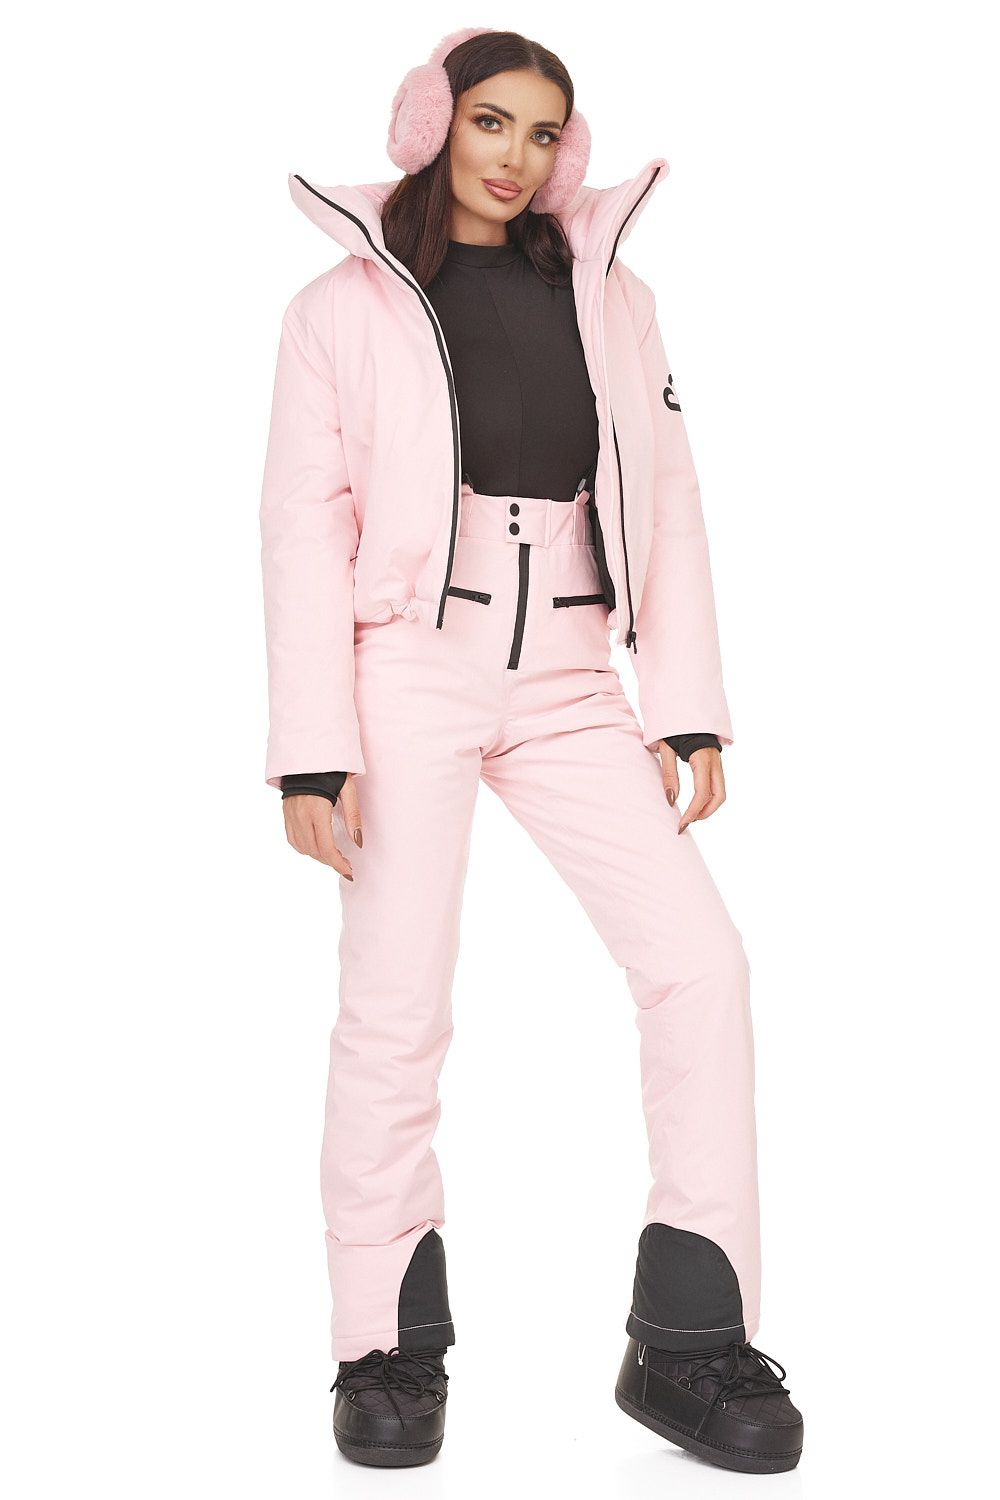 Pink casual ski suit Reasia Bogas